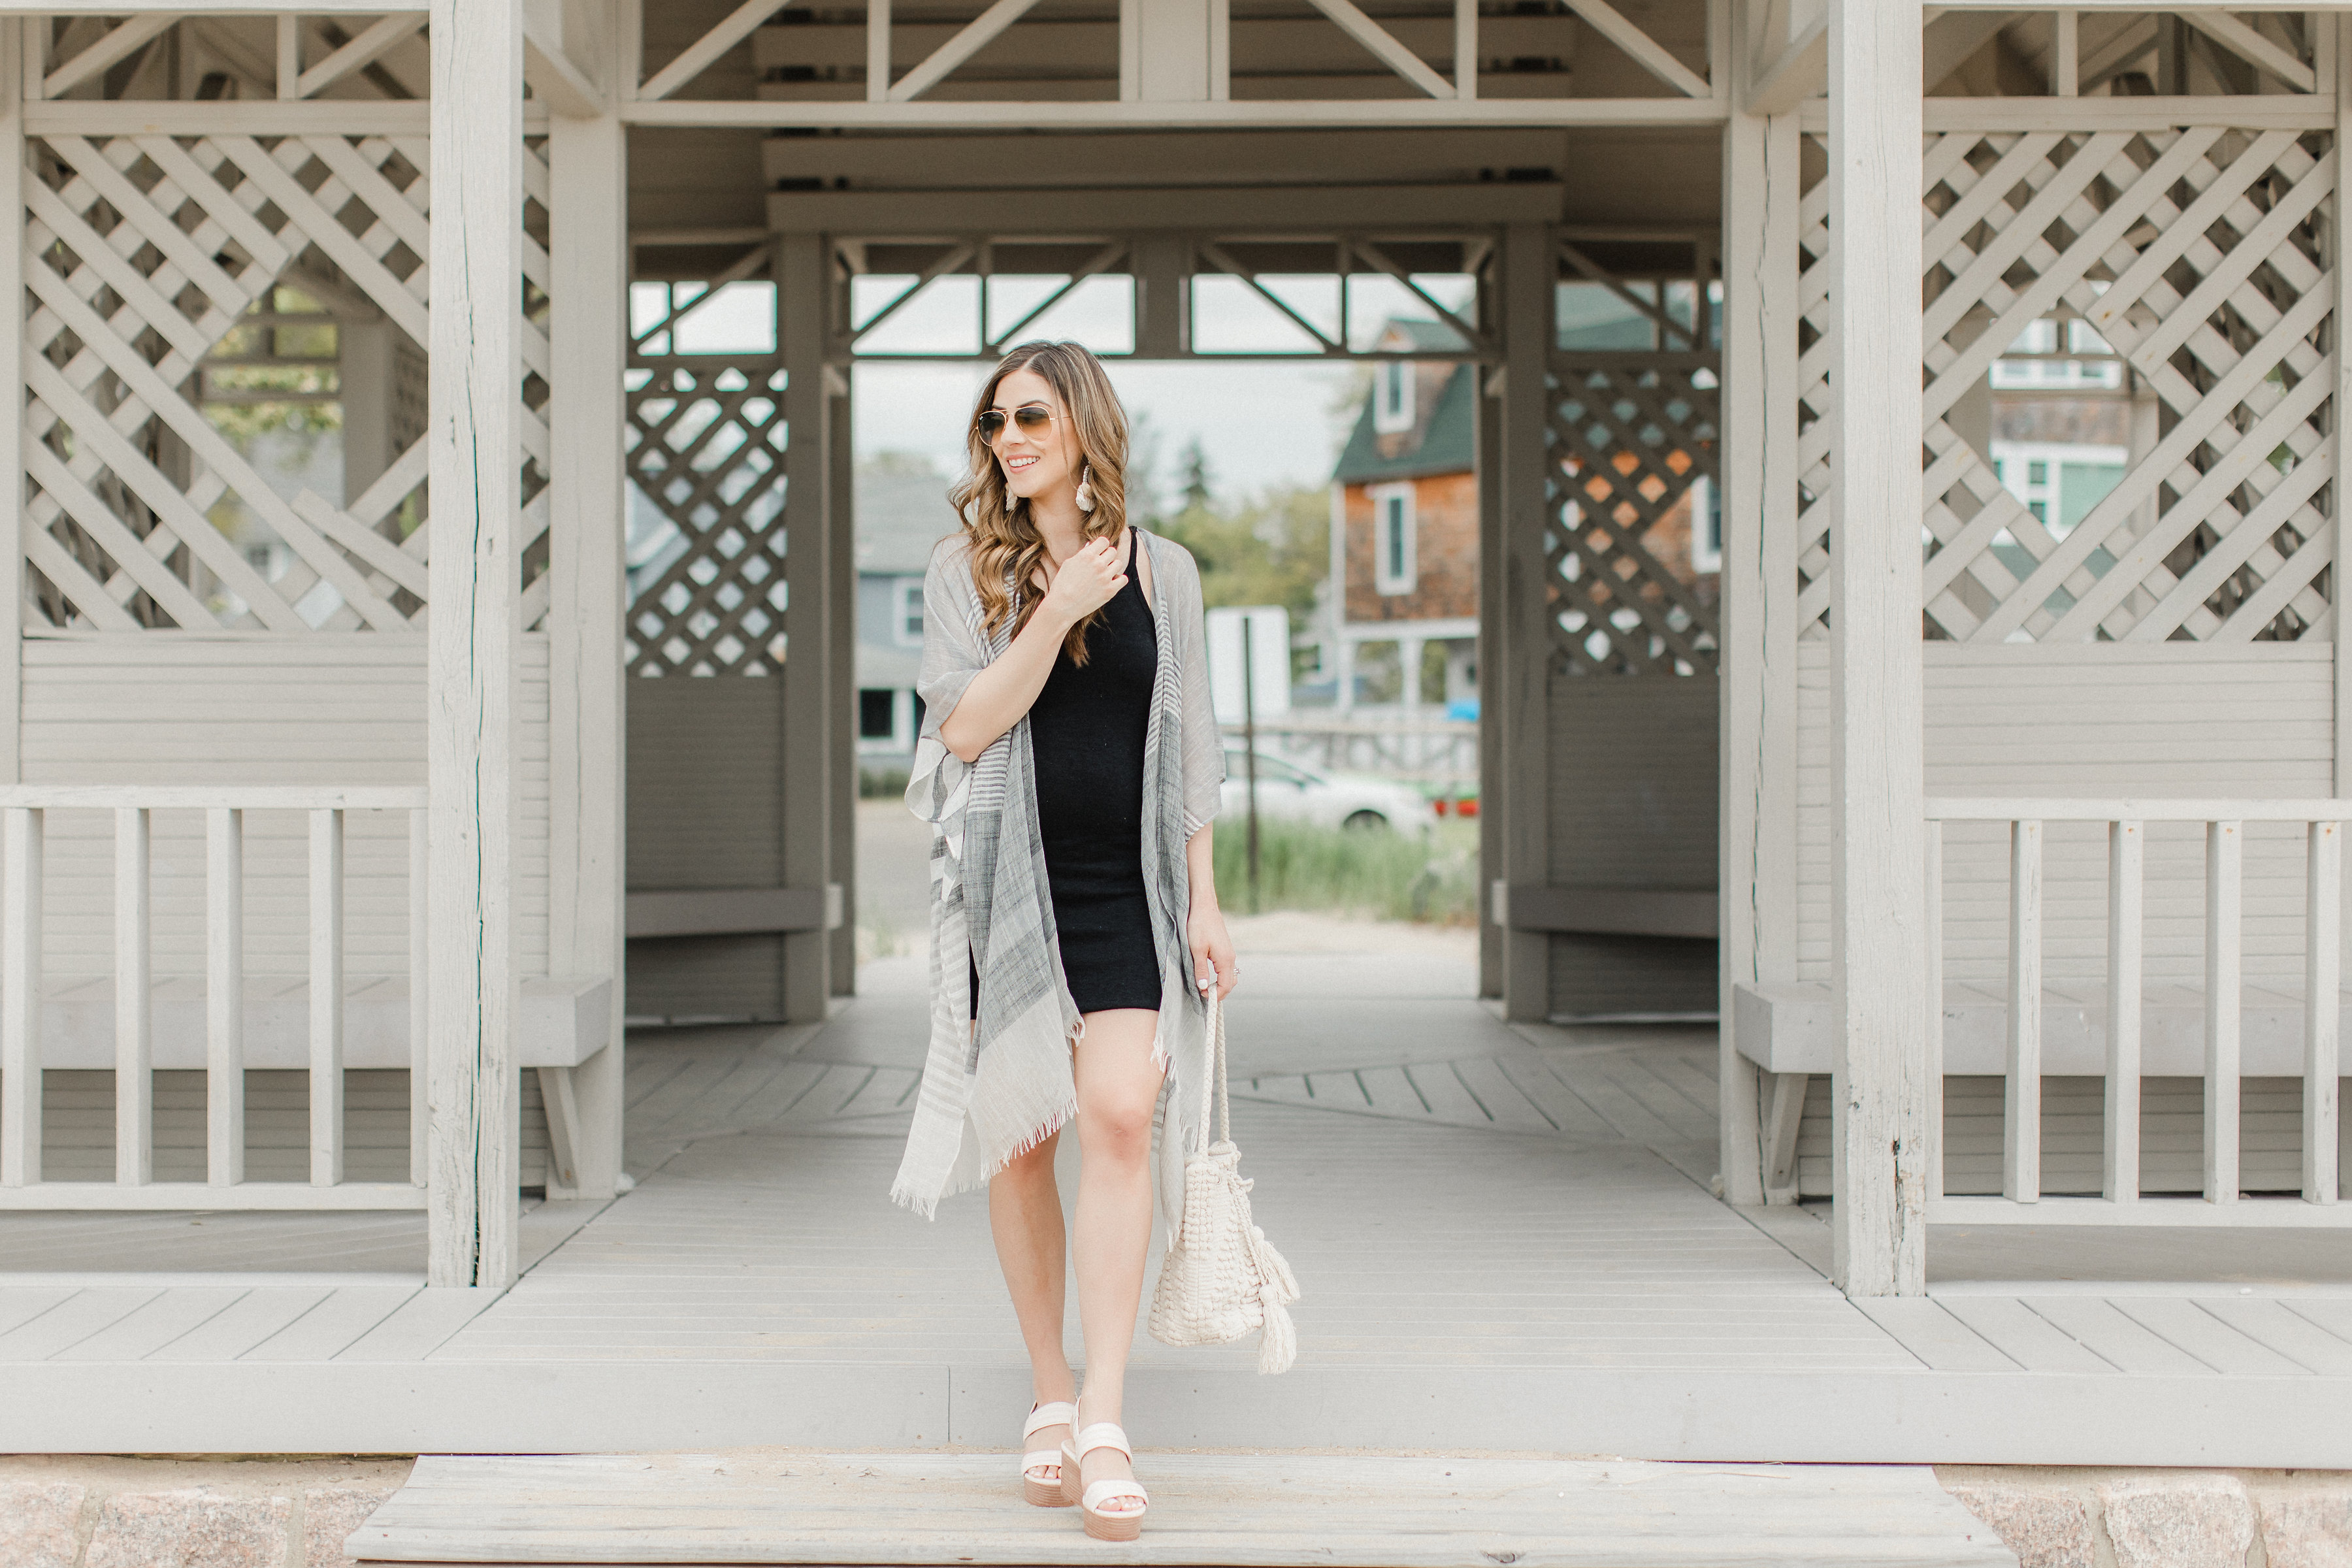 Life and style blogger Lauren McBride shares How to Style a Kimono for summer, featuring two looks taking a kimono from daytime to nighttime.